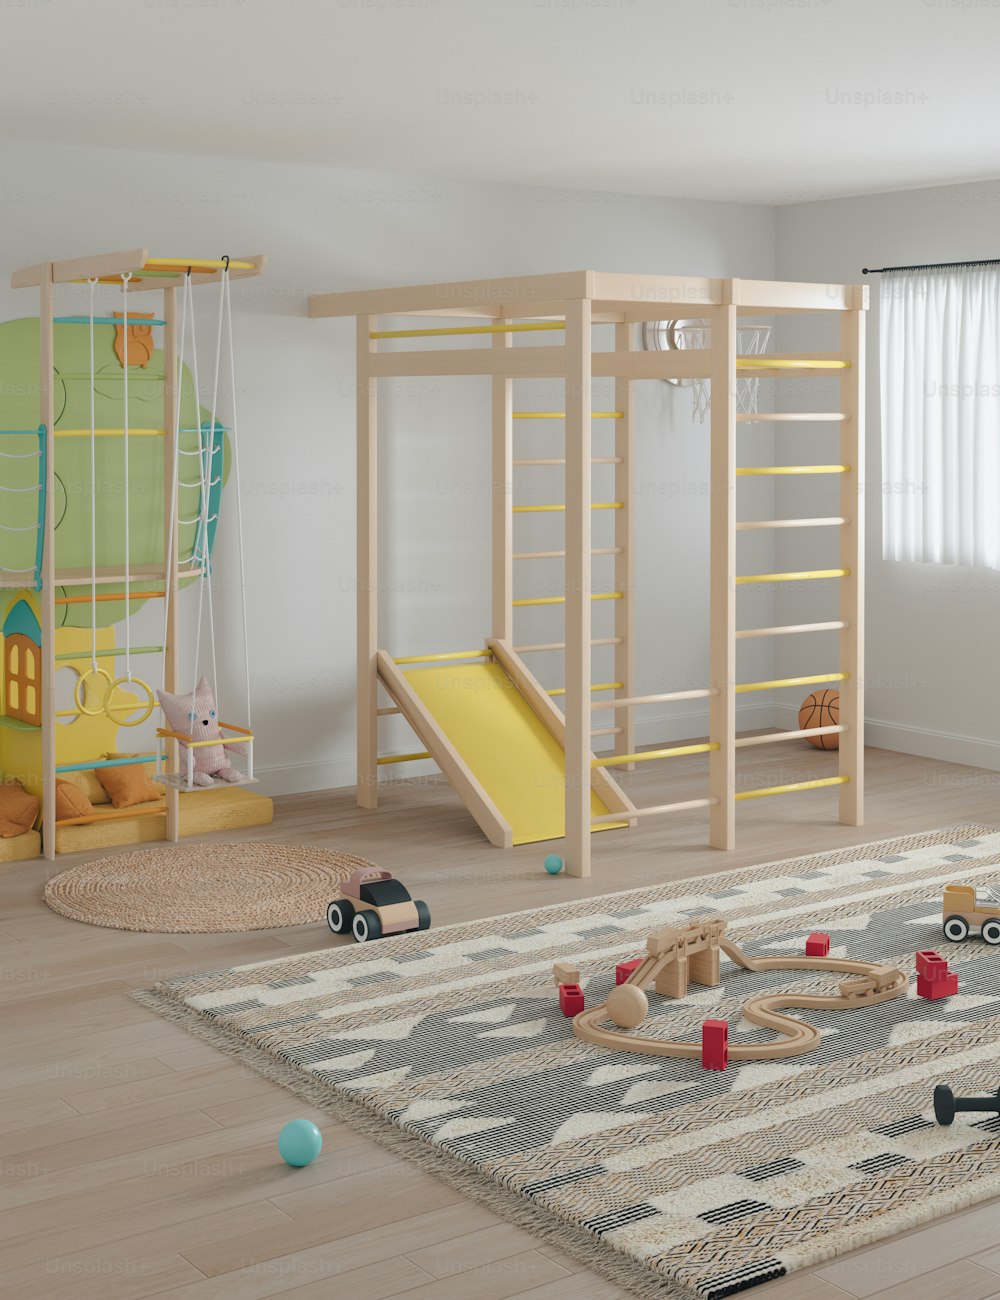 a child's play room with a slide and toys